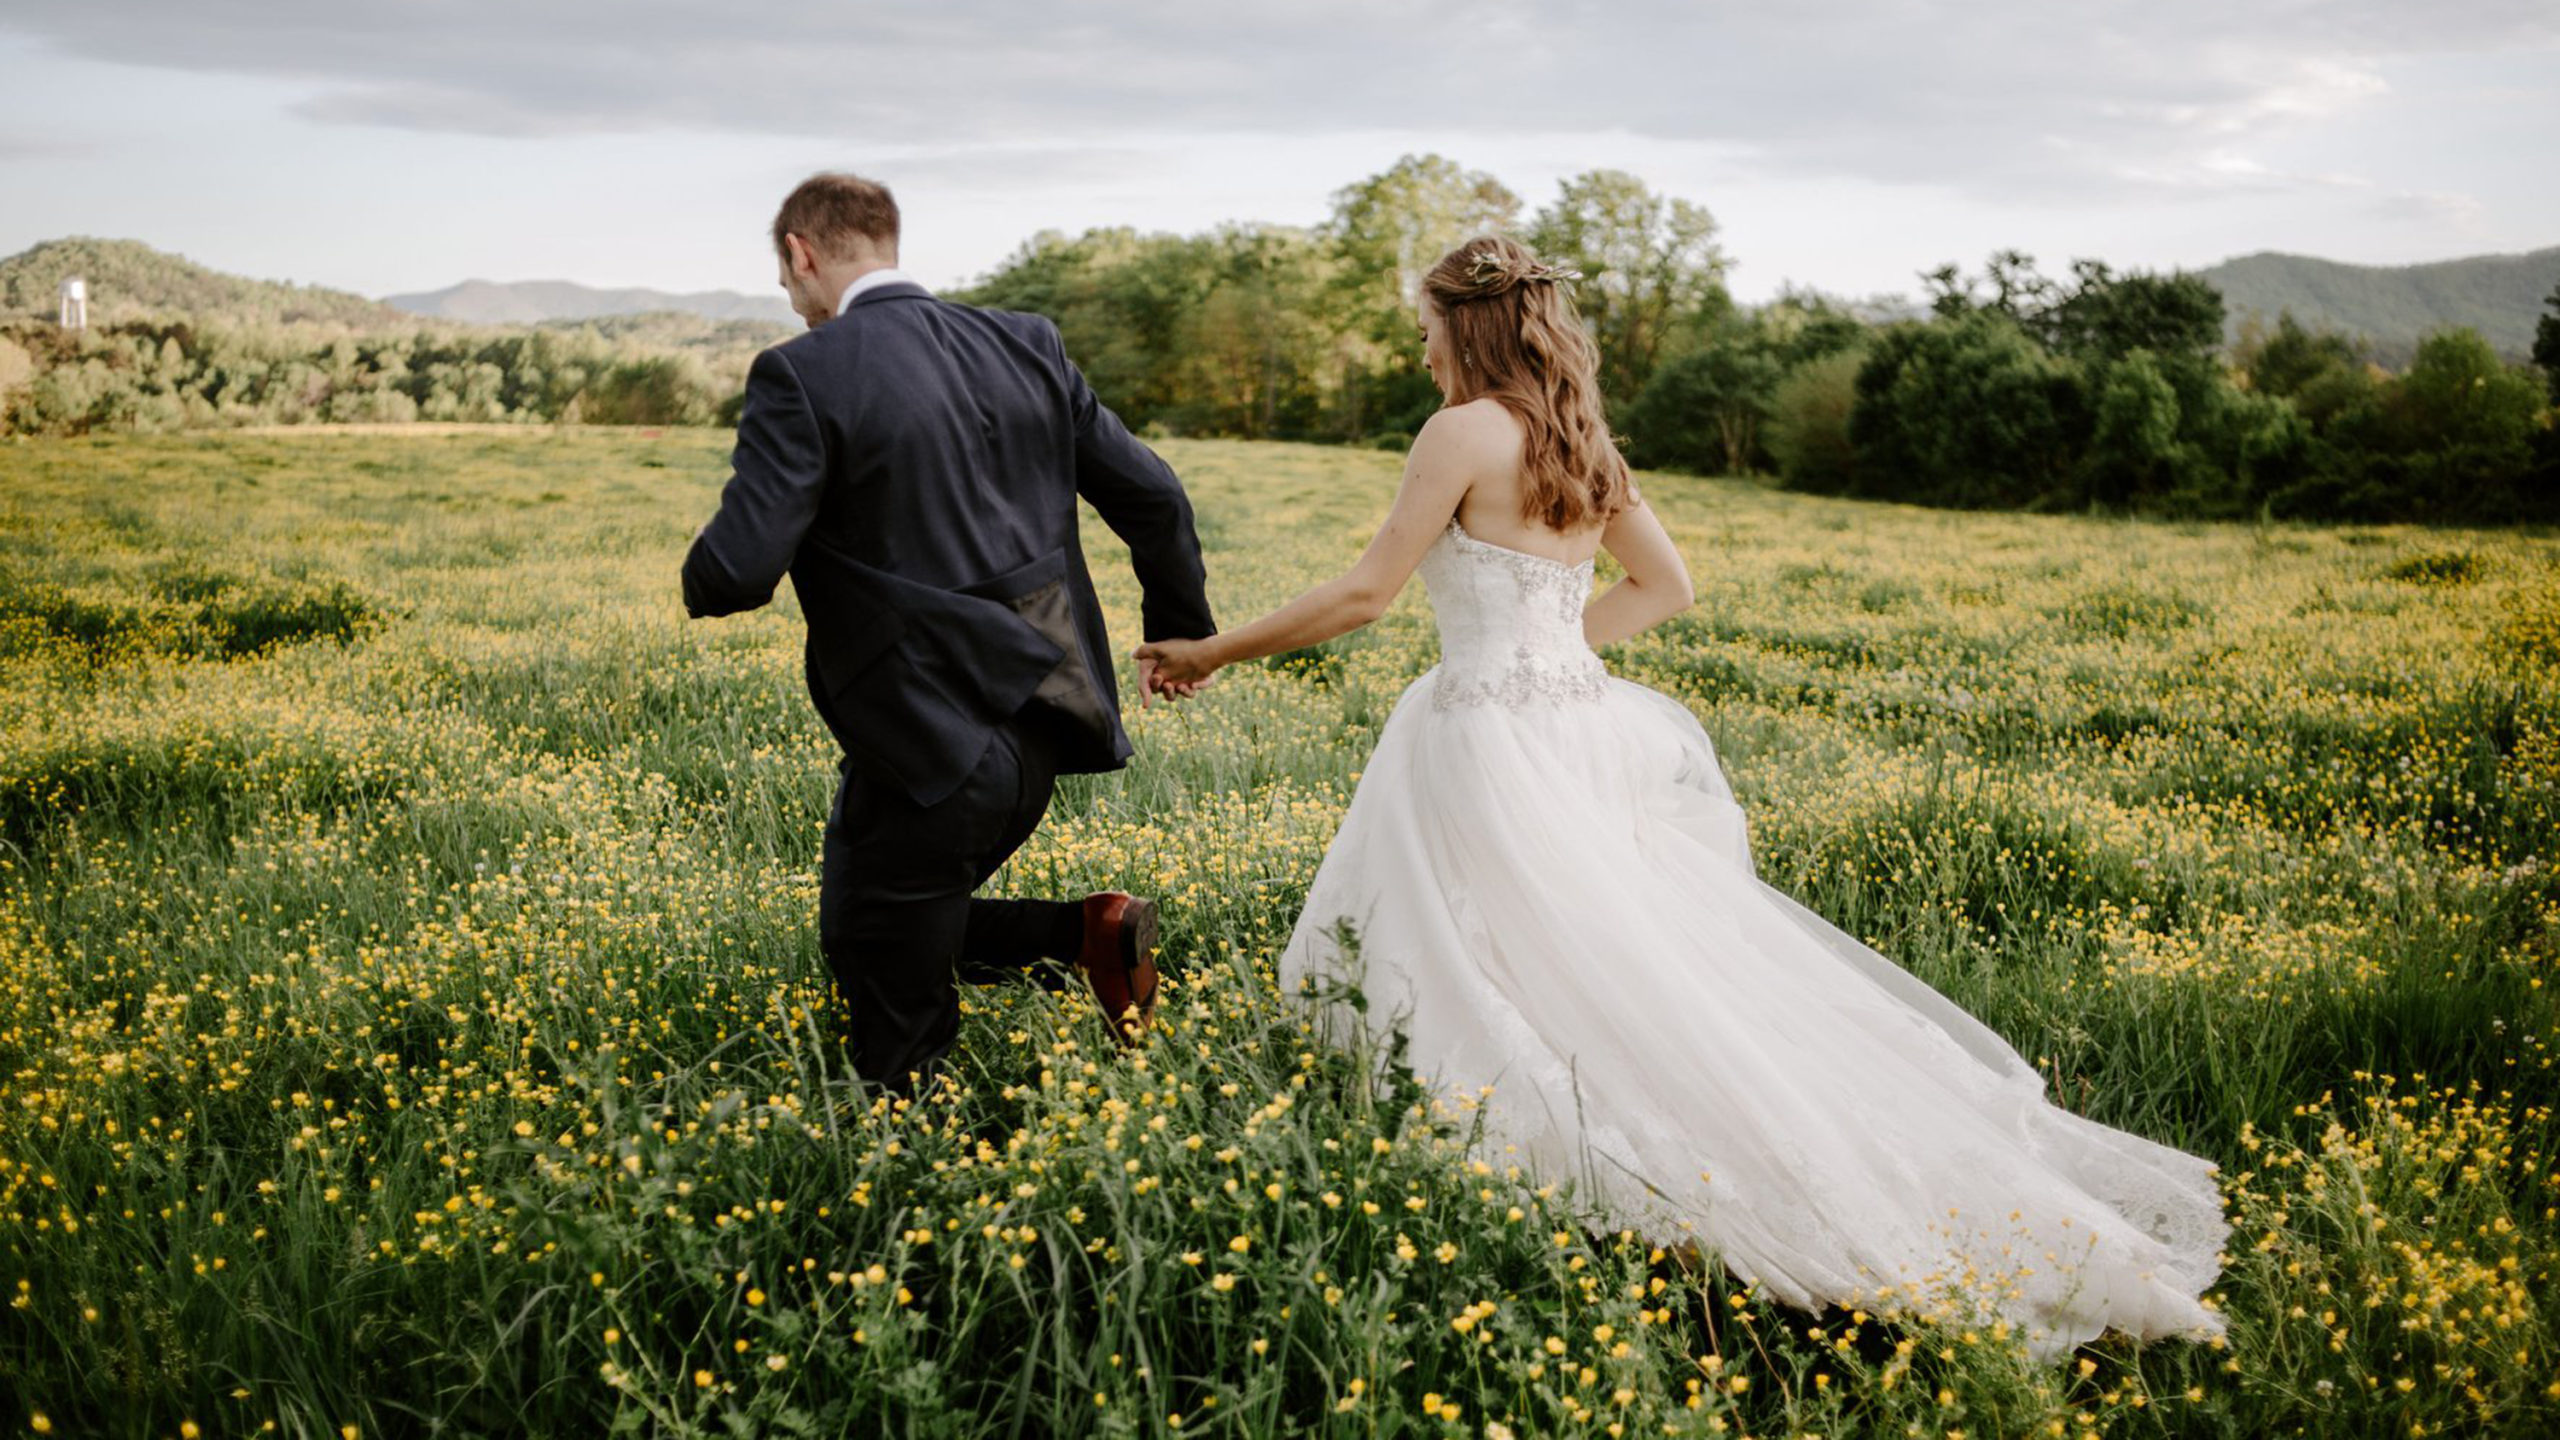 35 Fun & Romantic Activities For Newly-Weds You Should Try